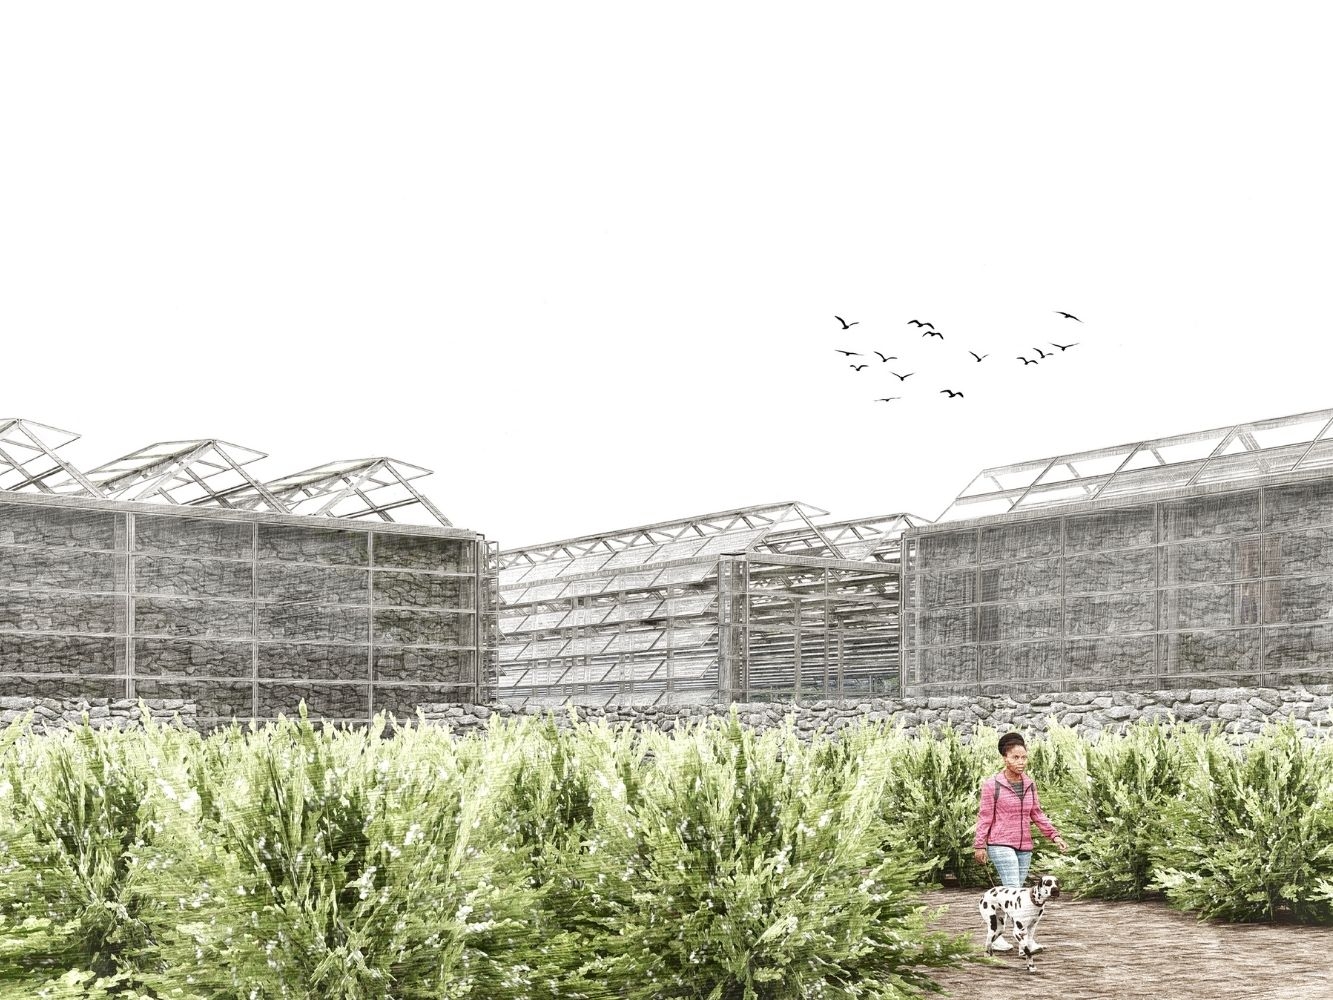 Architectural rendering of horticulture facility with an adjoining gin distillery exterior